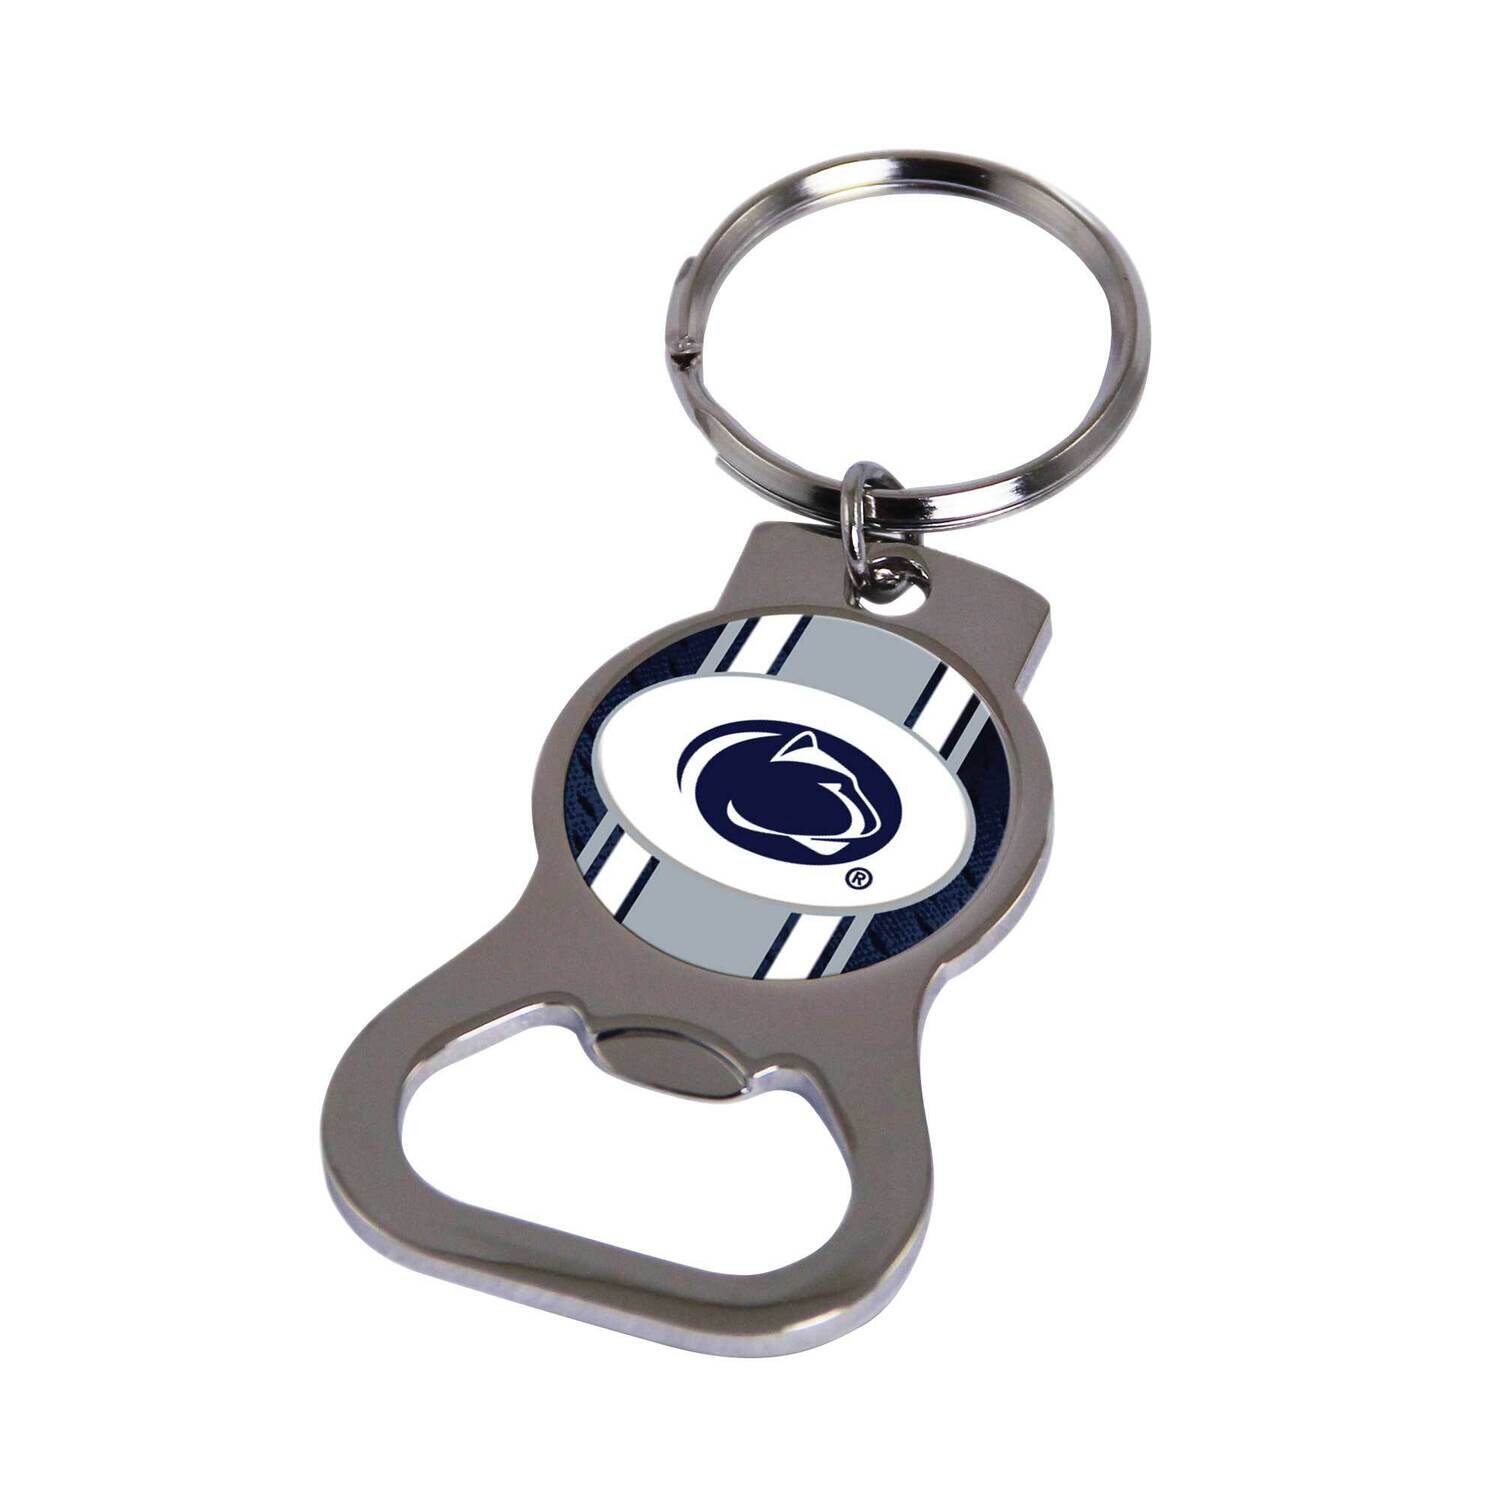 Ncaa Penn State Bottle Opener Key Ring By Rico Industries GC6410